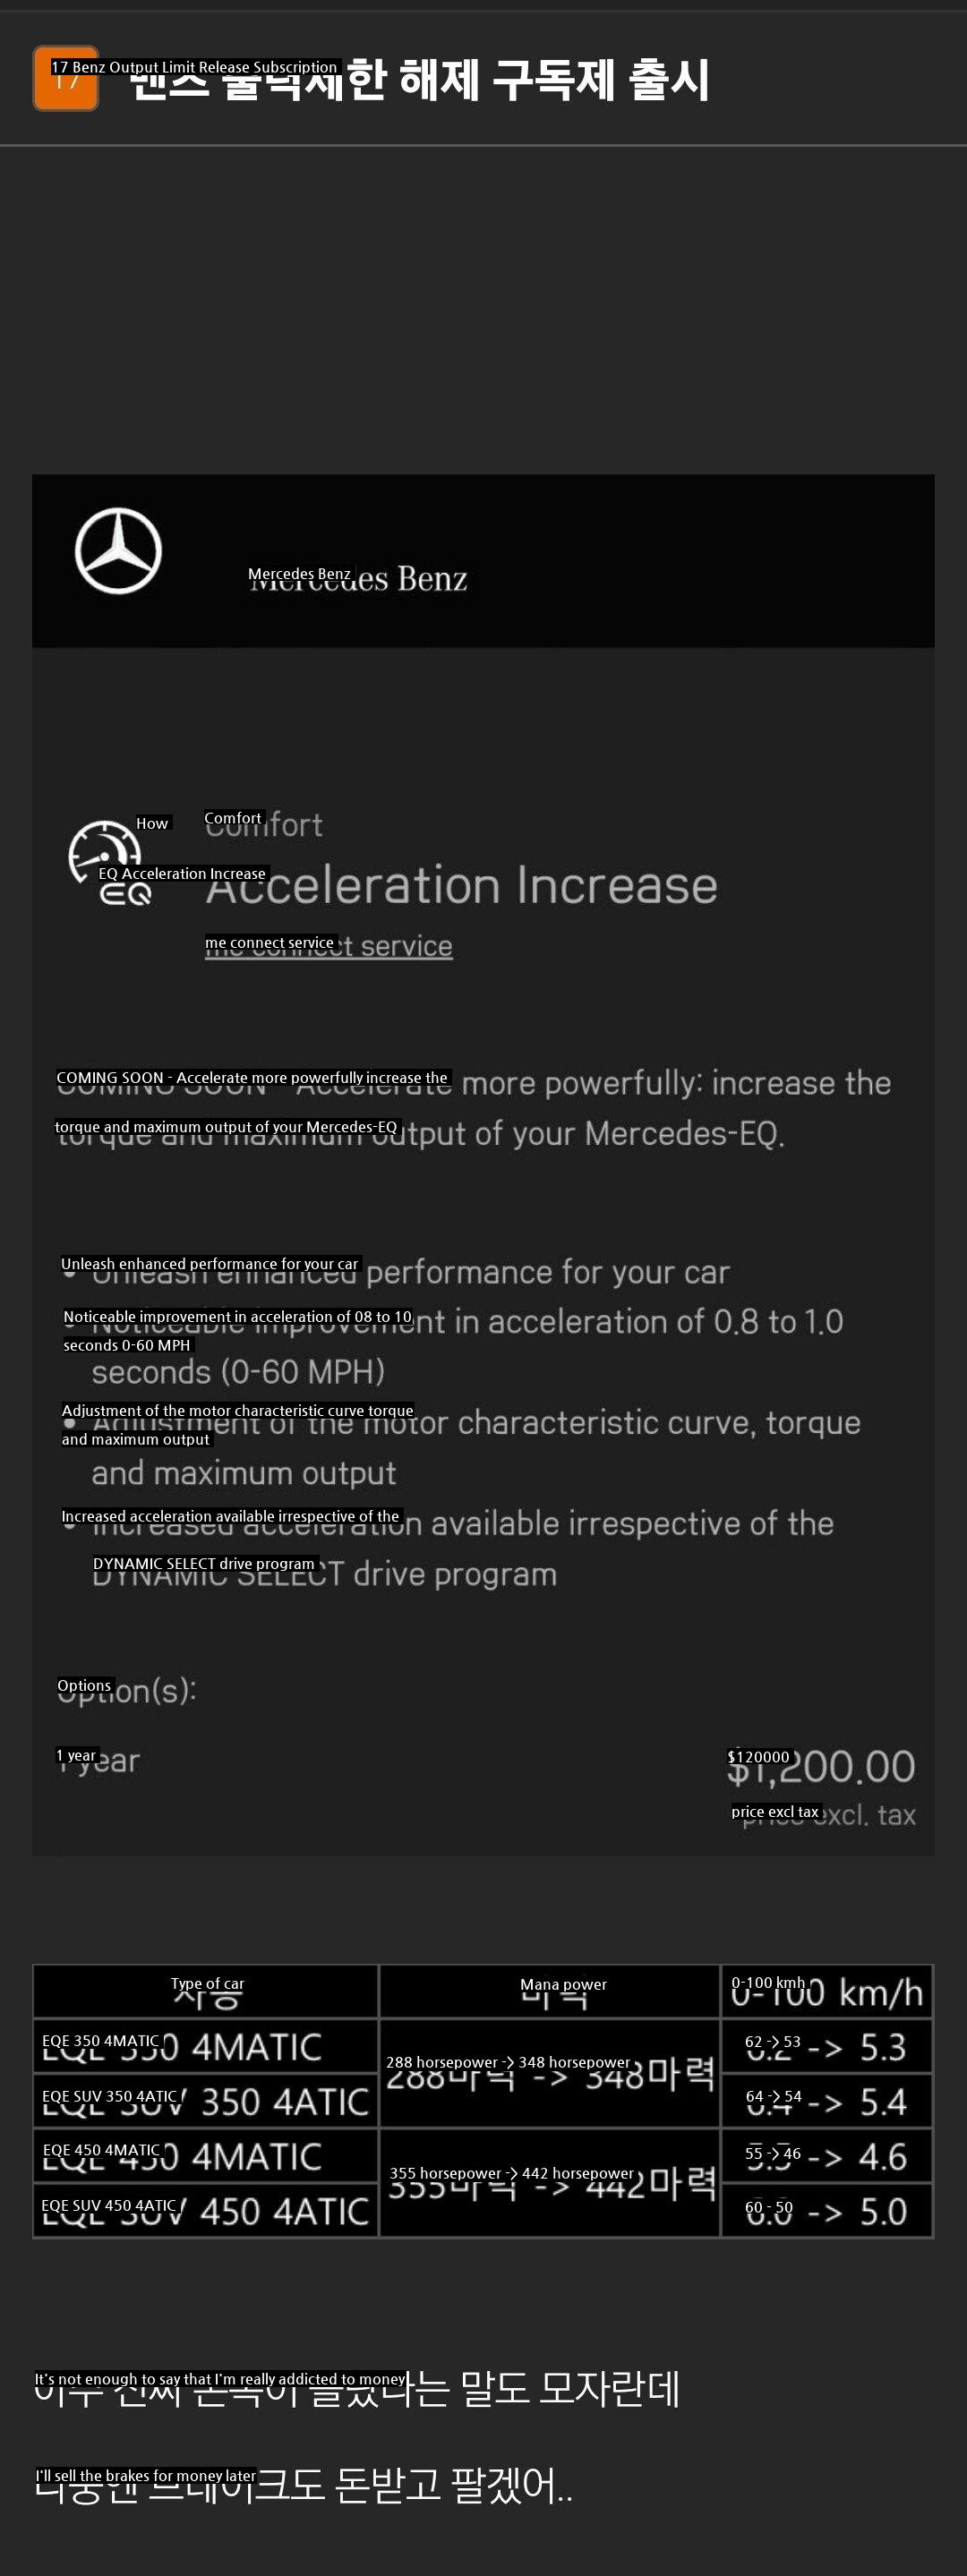 Updates on Mercedes-Benz's new subscription service